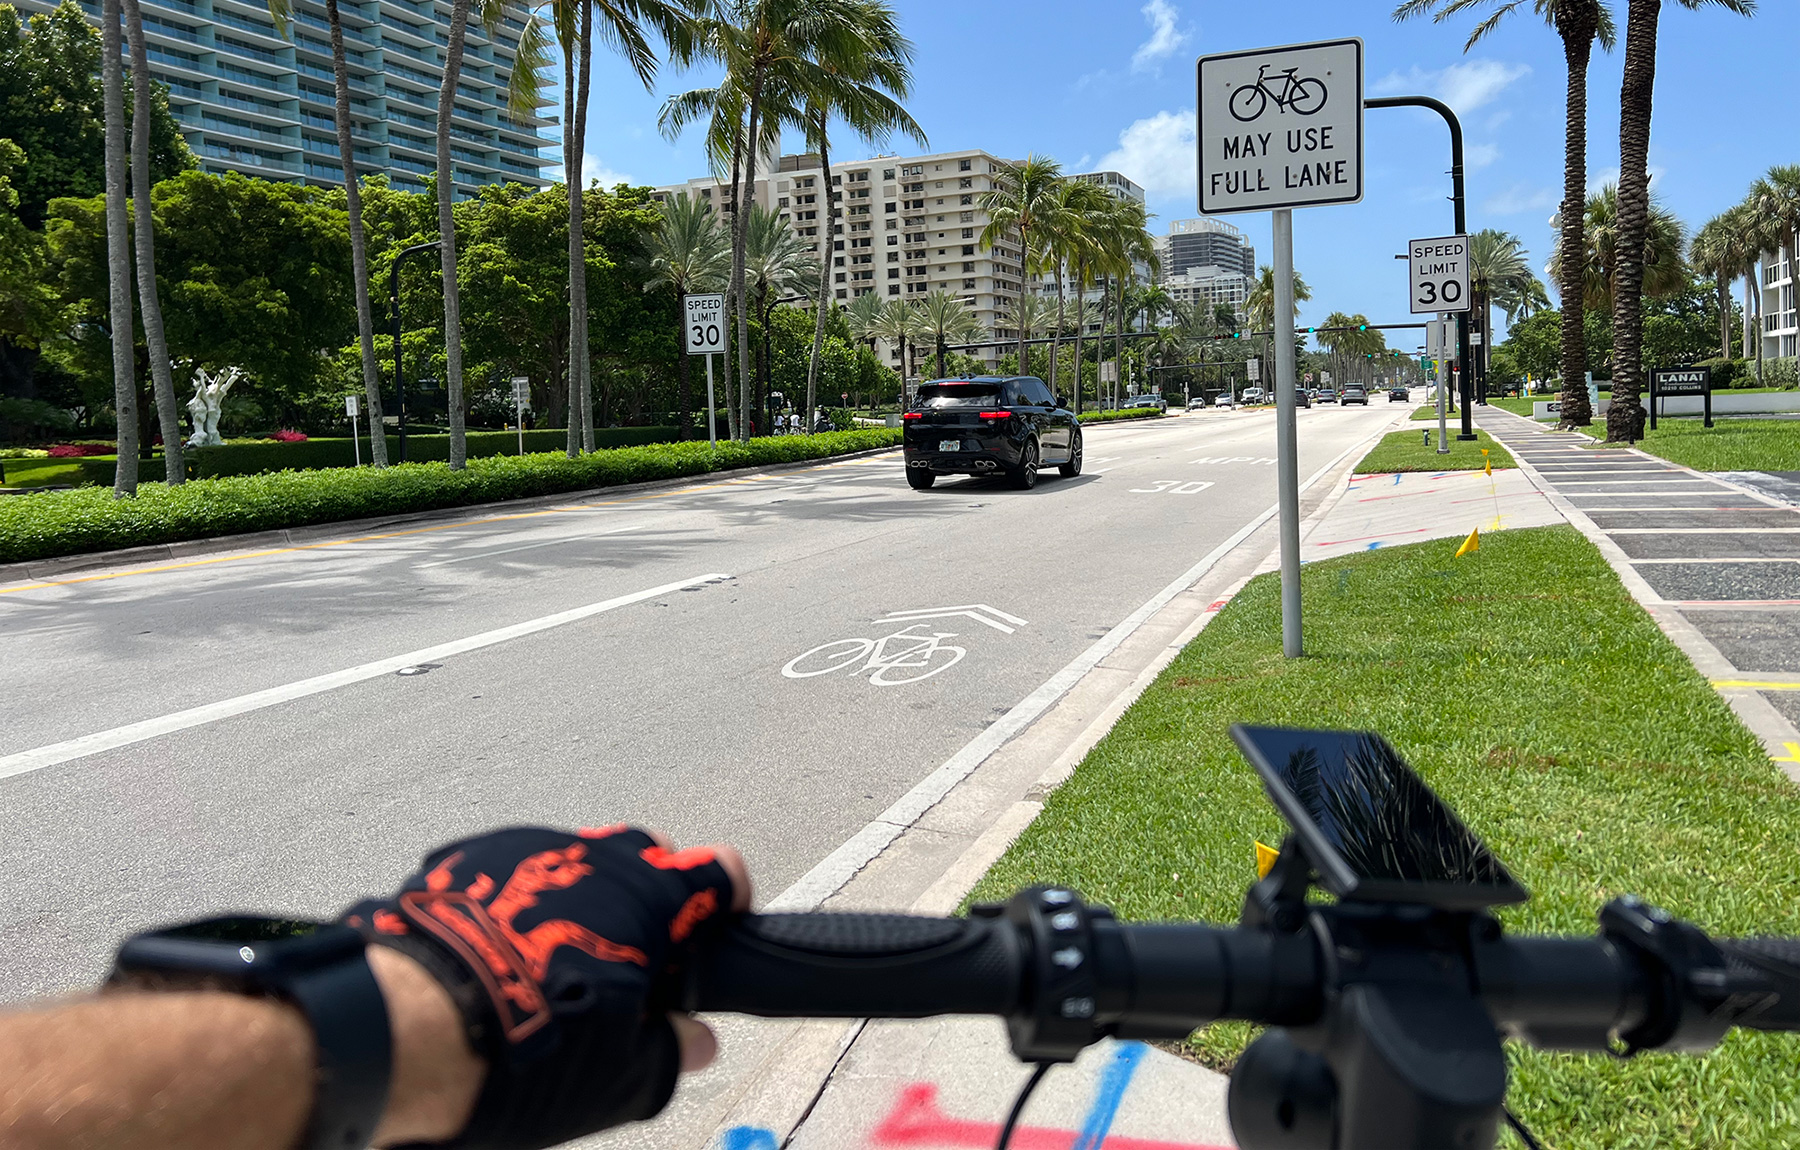 Here’s what I learnt riding an e-scooter around Miami every day